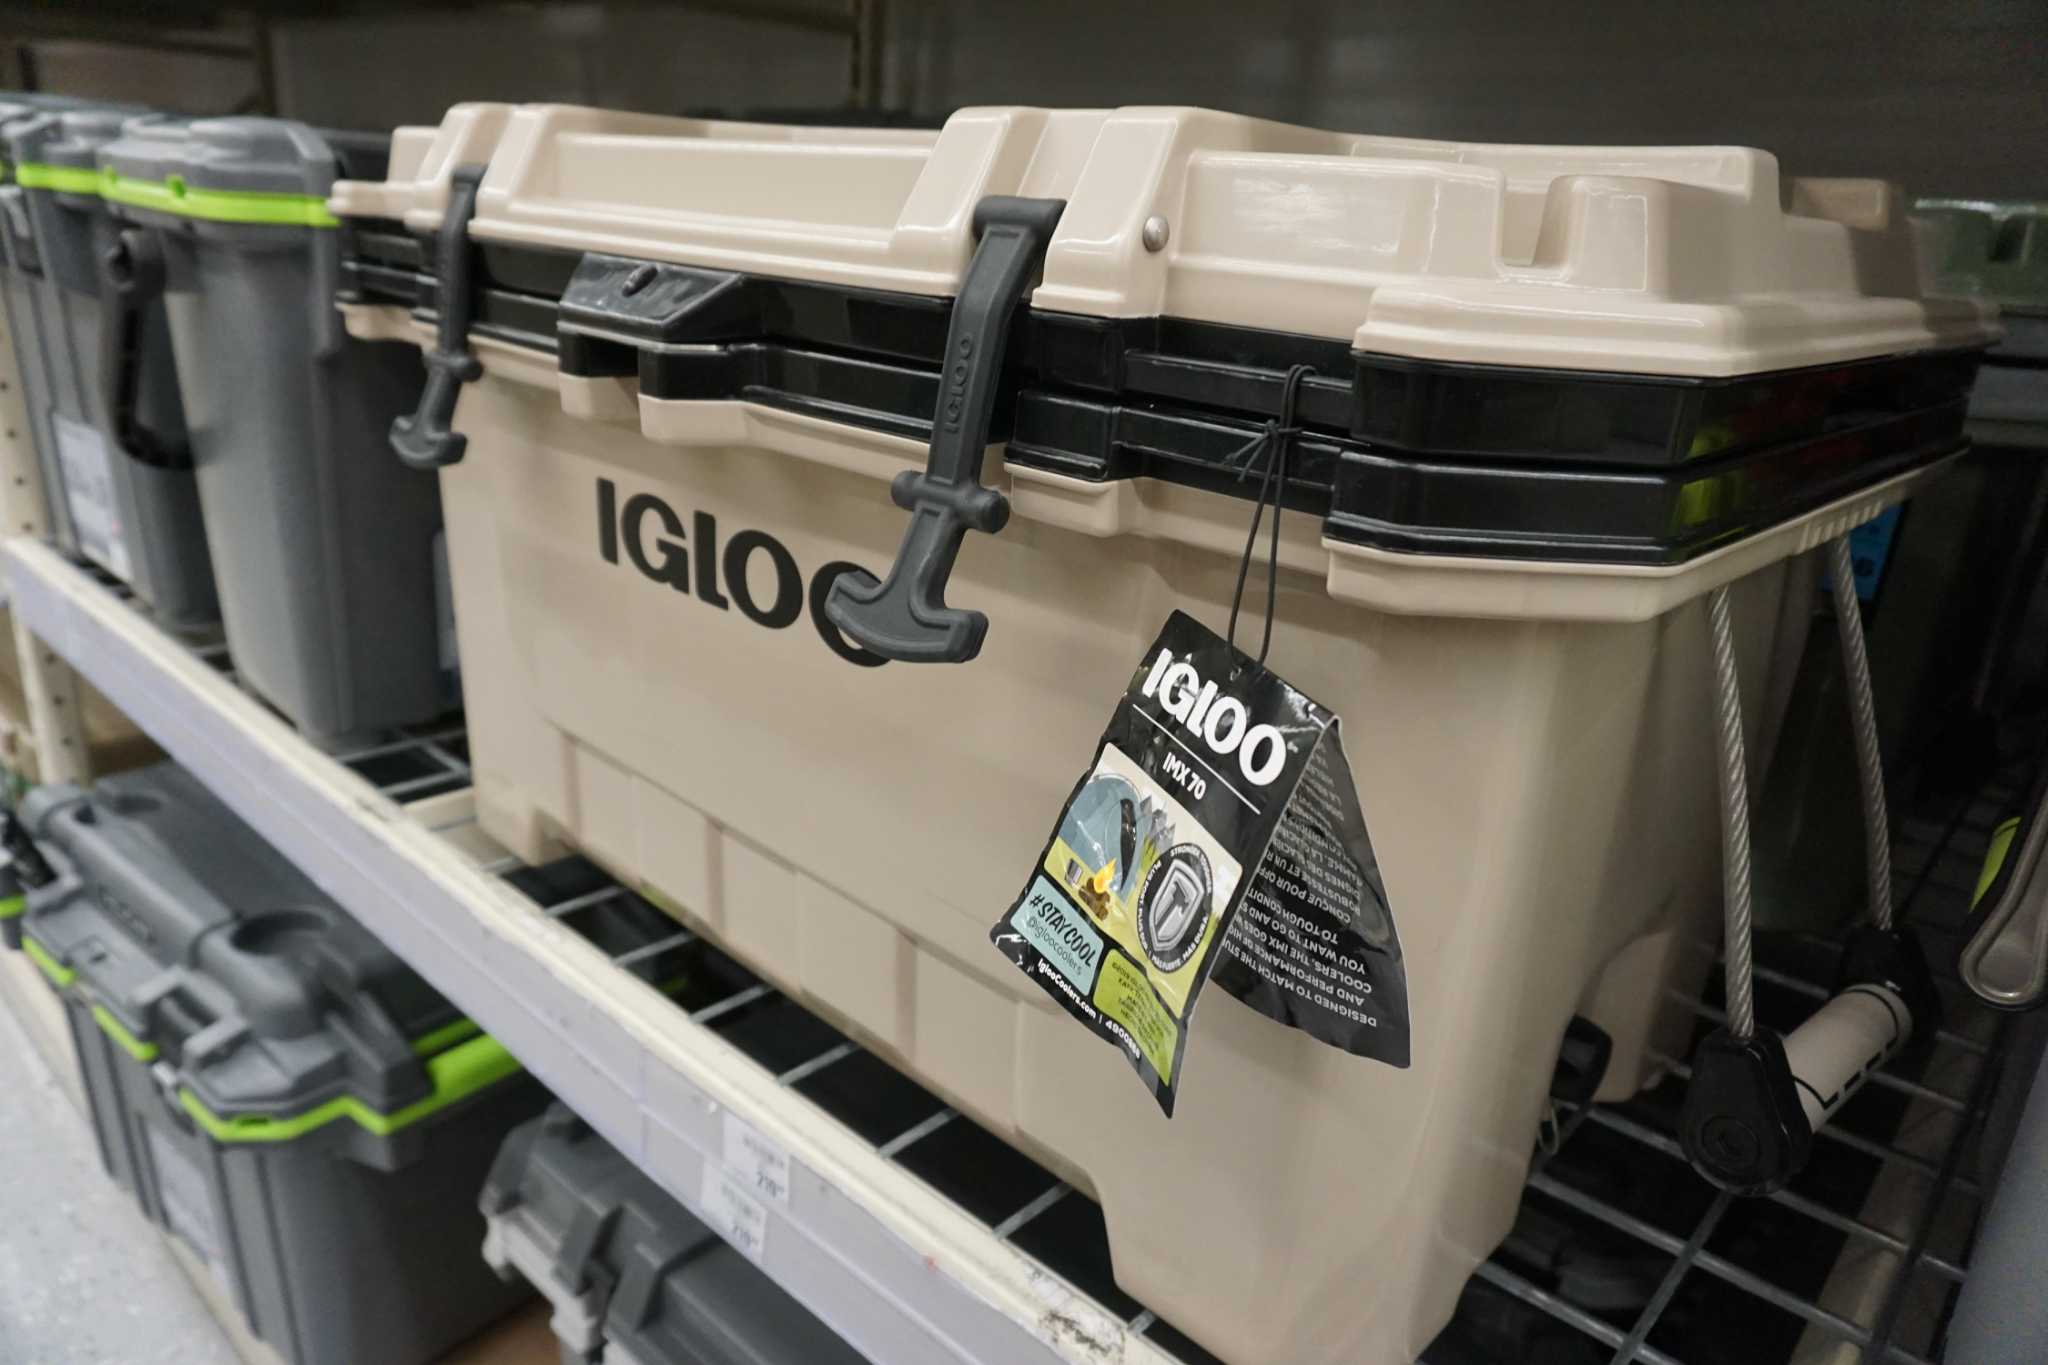 Accurate data helps Igloo coolers improve product quality